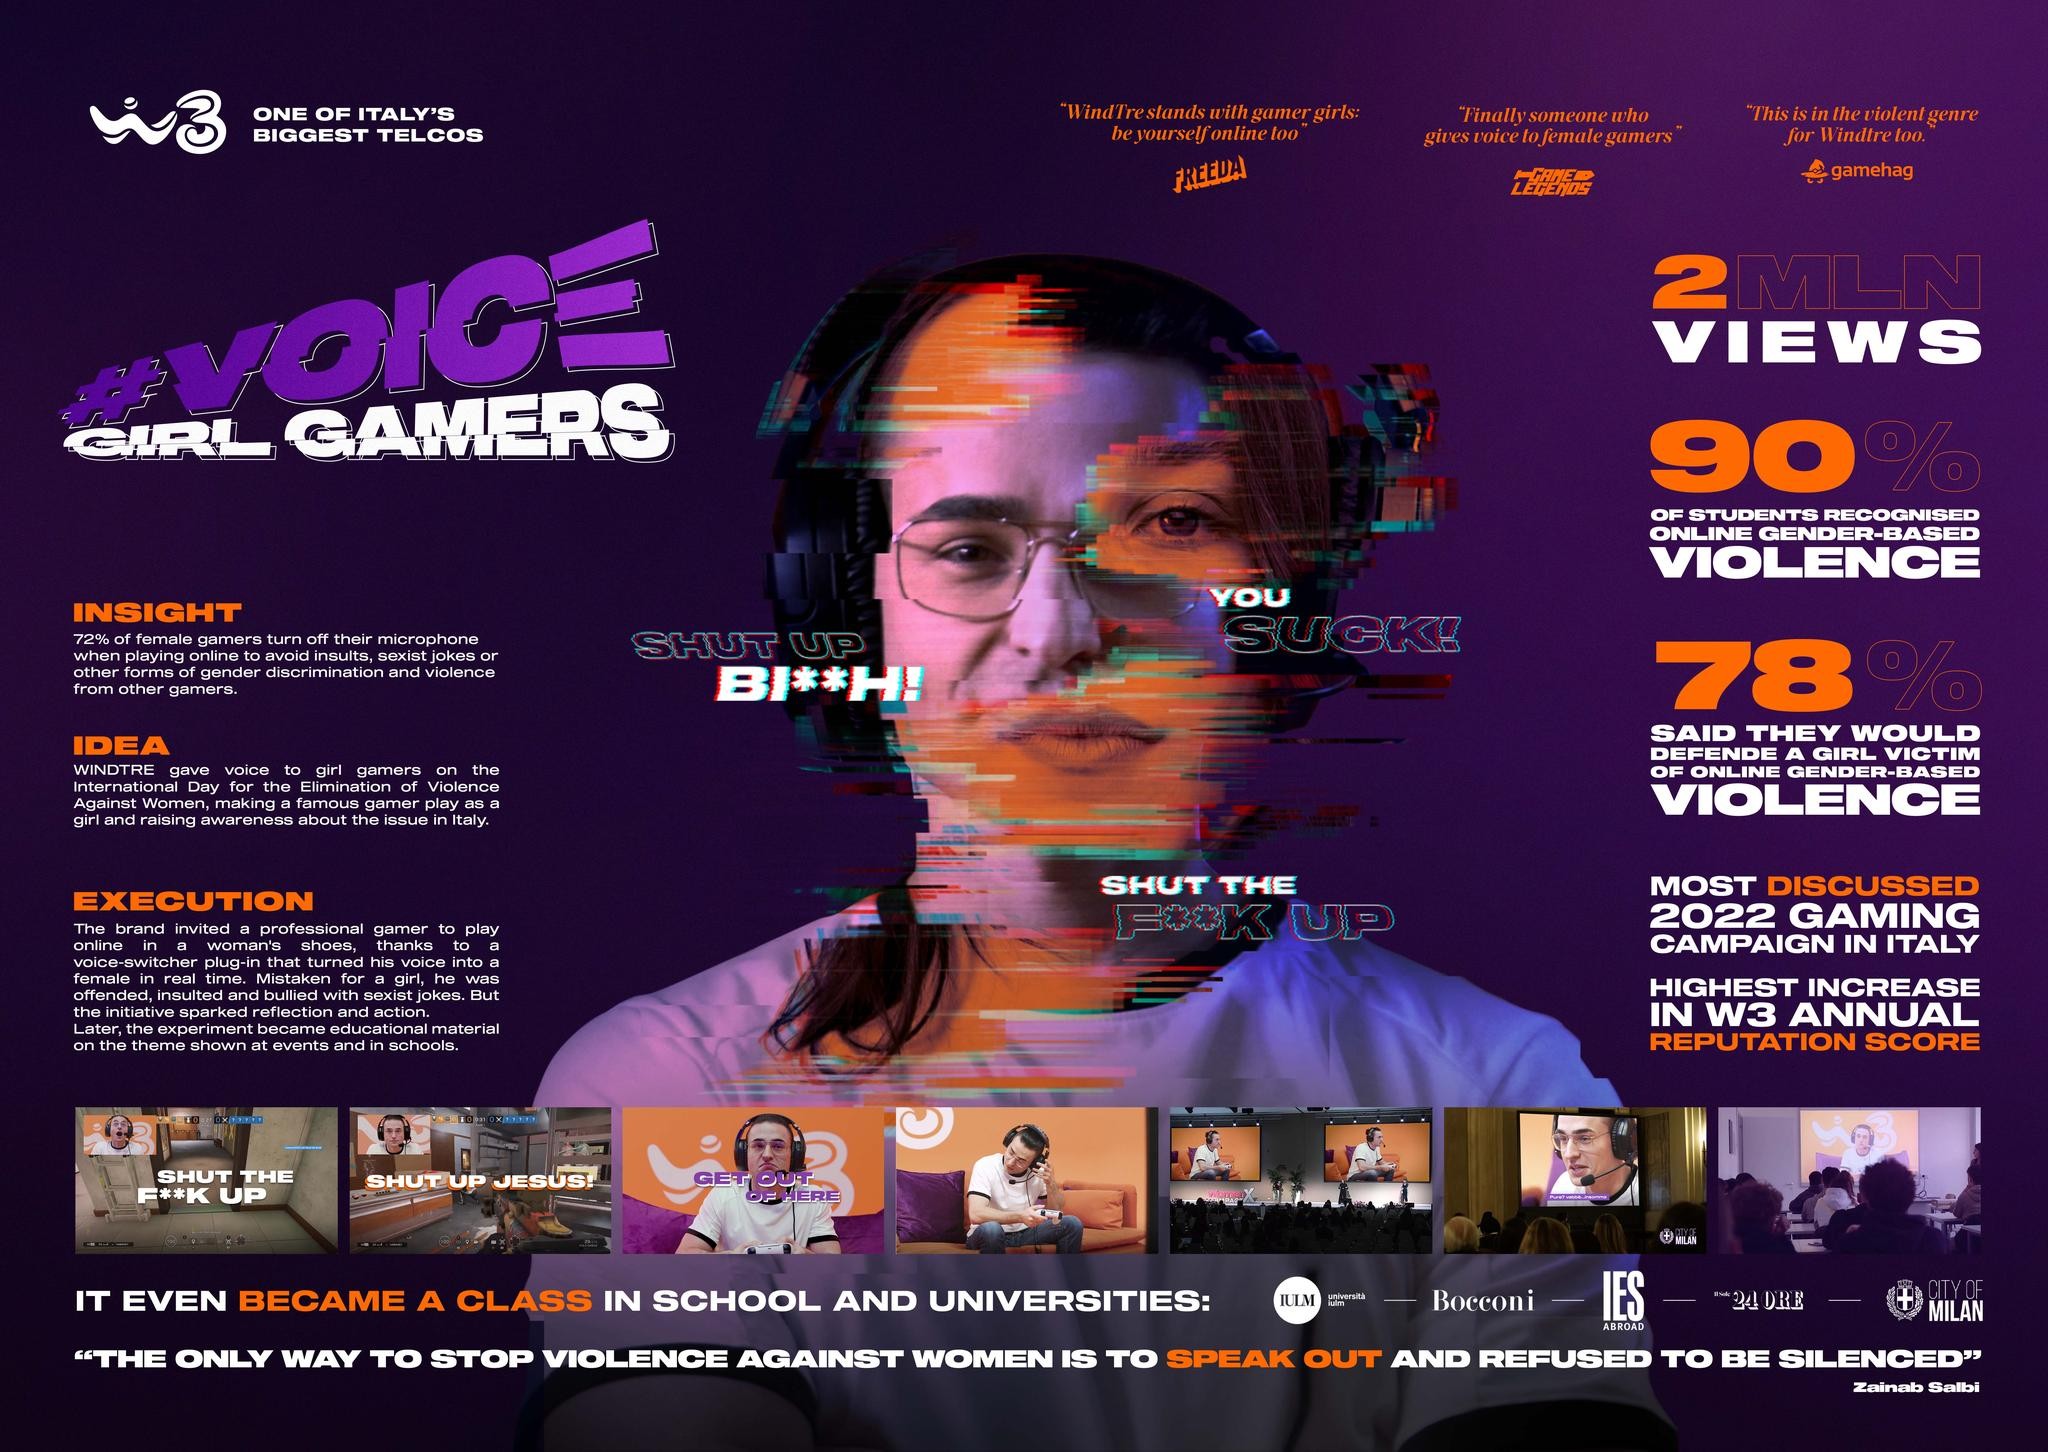 Voice Girl Gamers